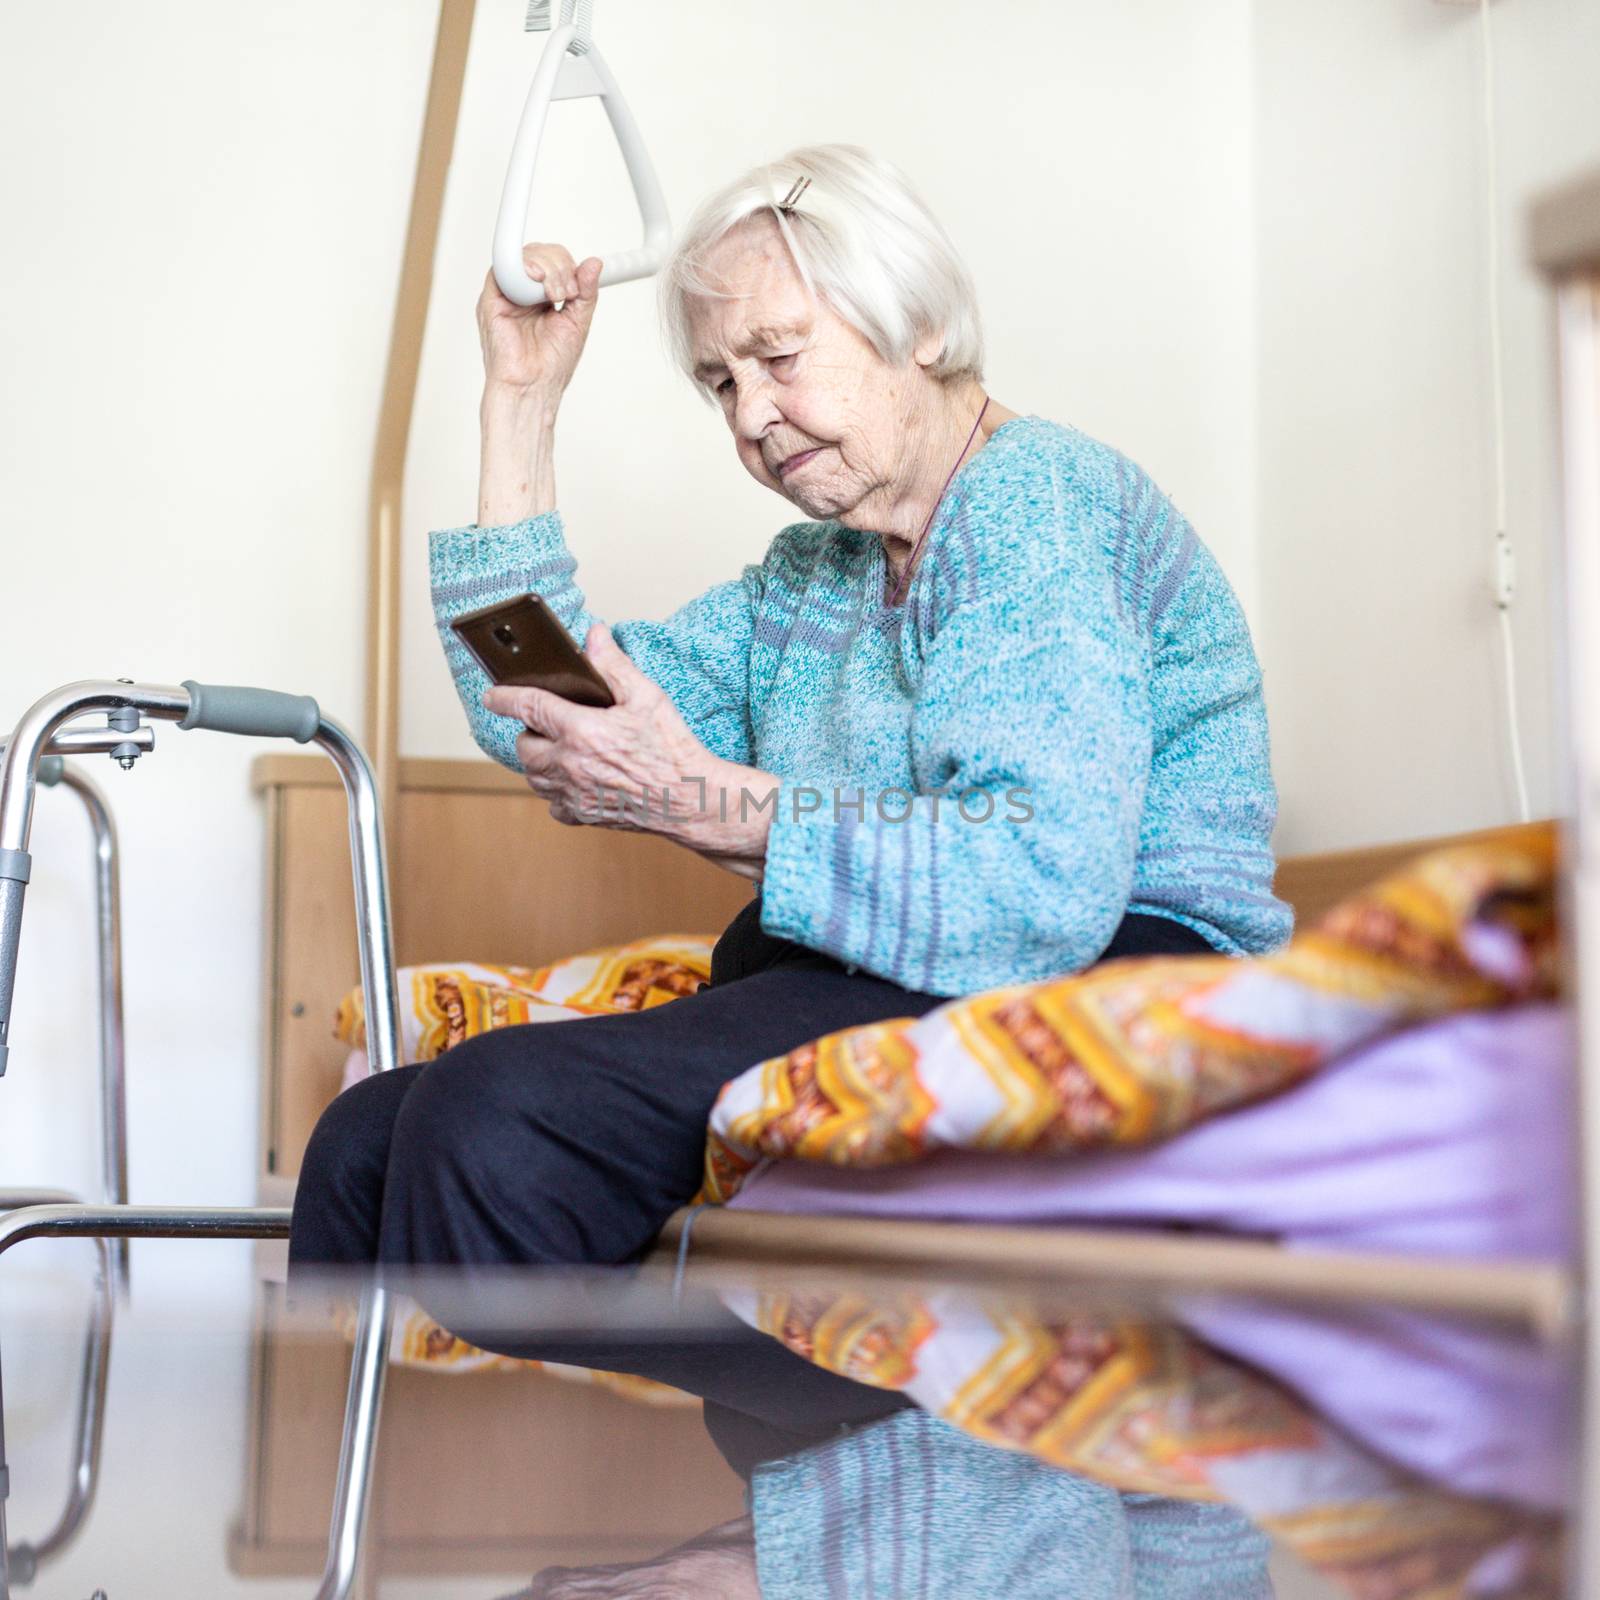 Elderly 96 years old woman reading phone message while sitting on medical bed supporting her by holder. Senior woman using wireless internet connection on smart phone.